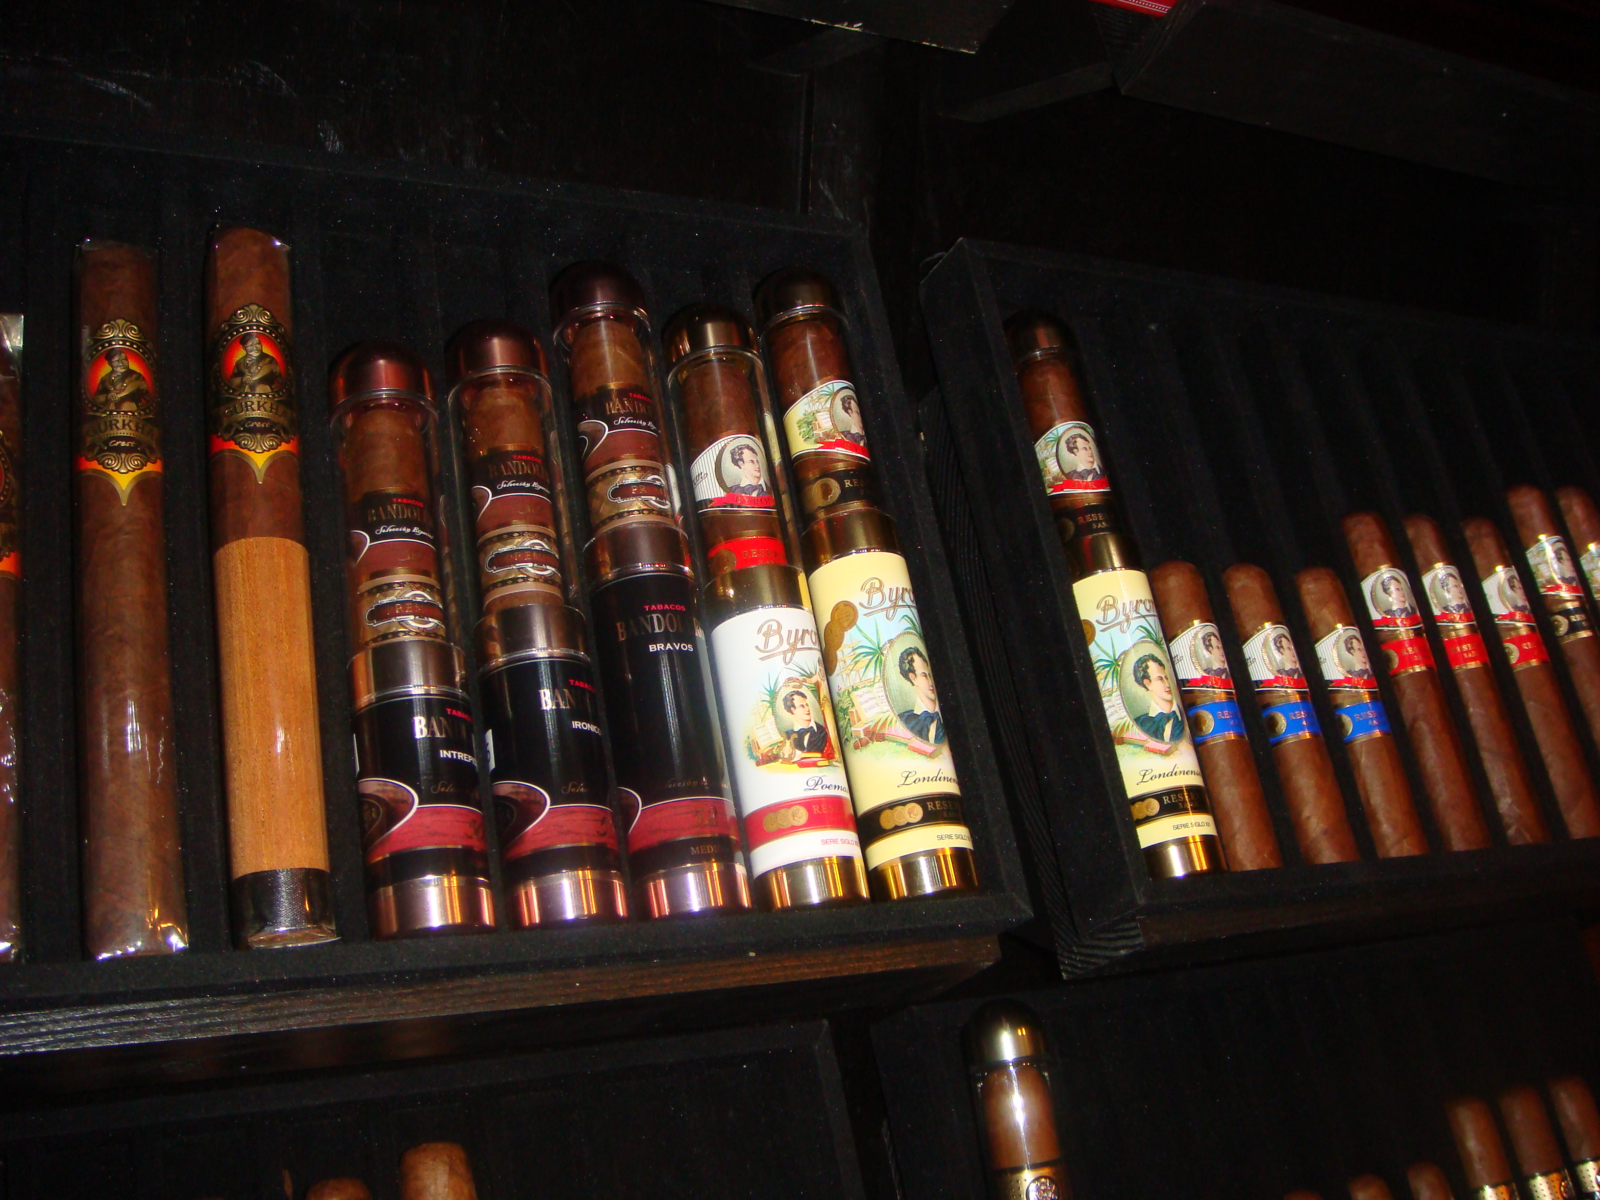 Exclusive cigars in the black cabinet